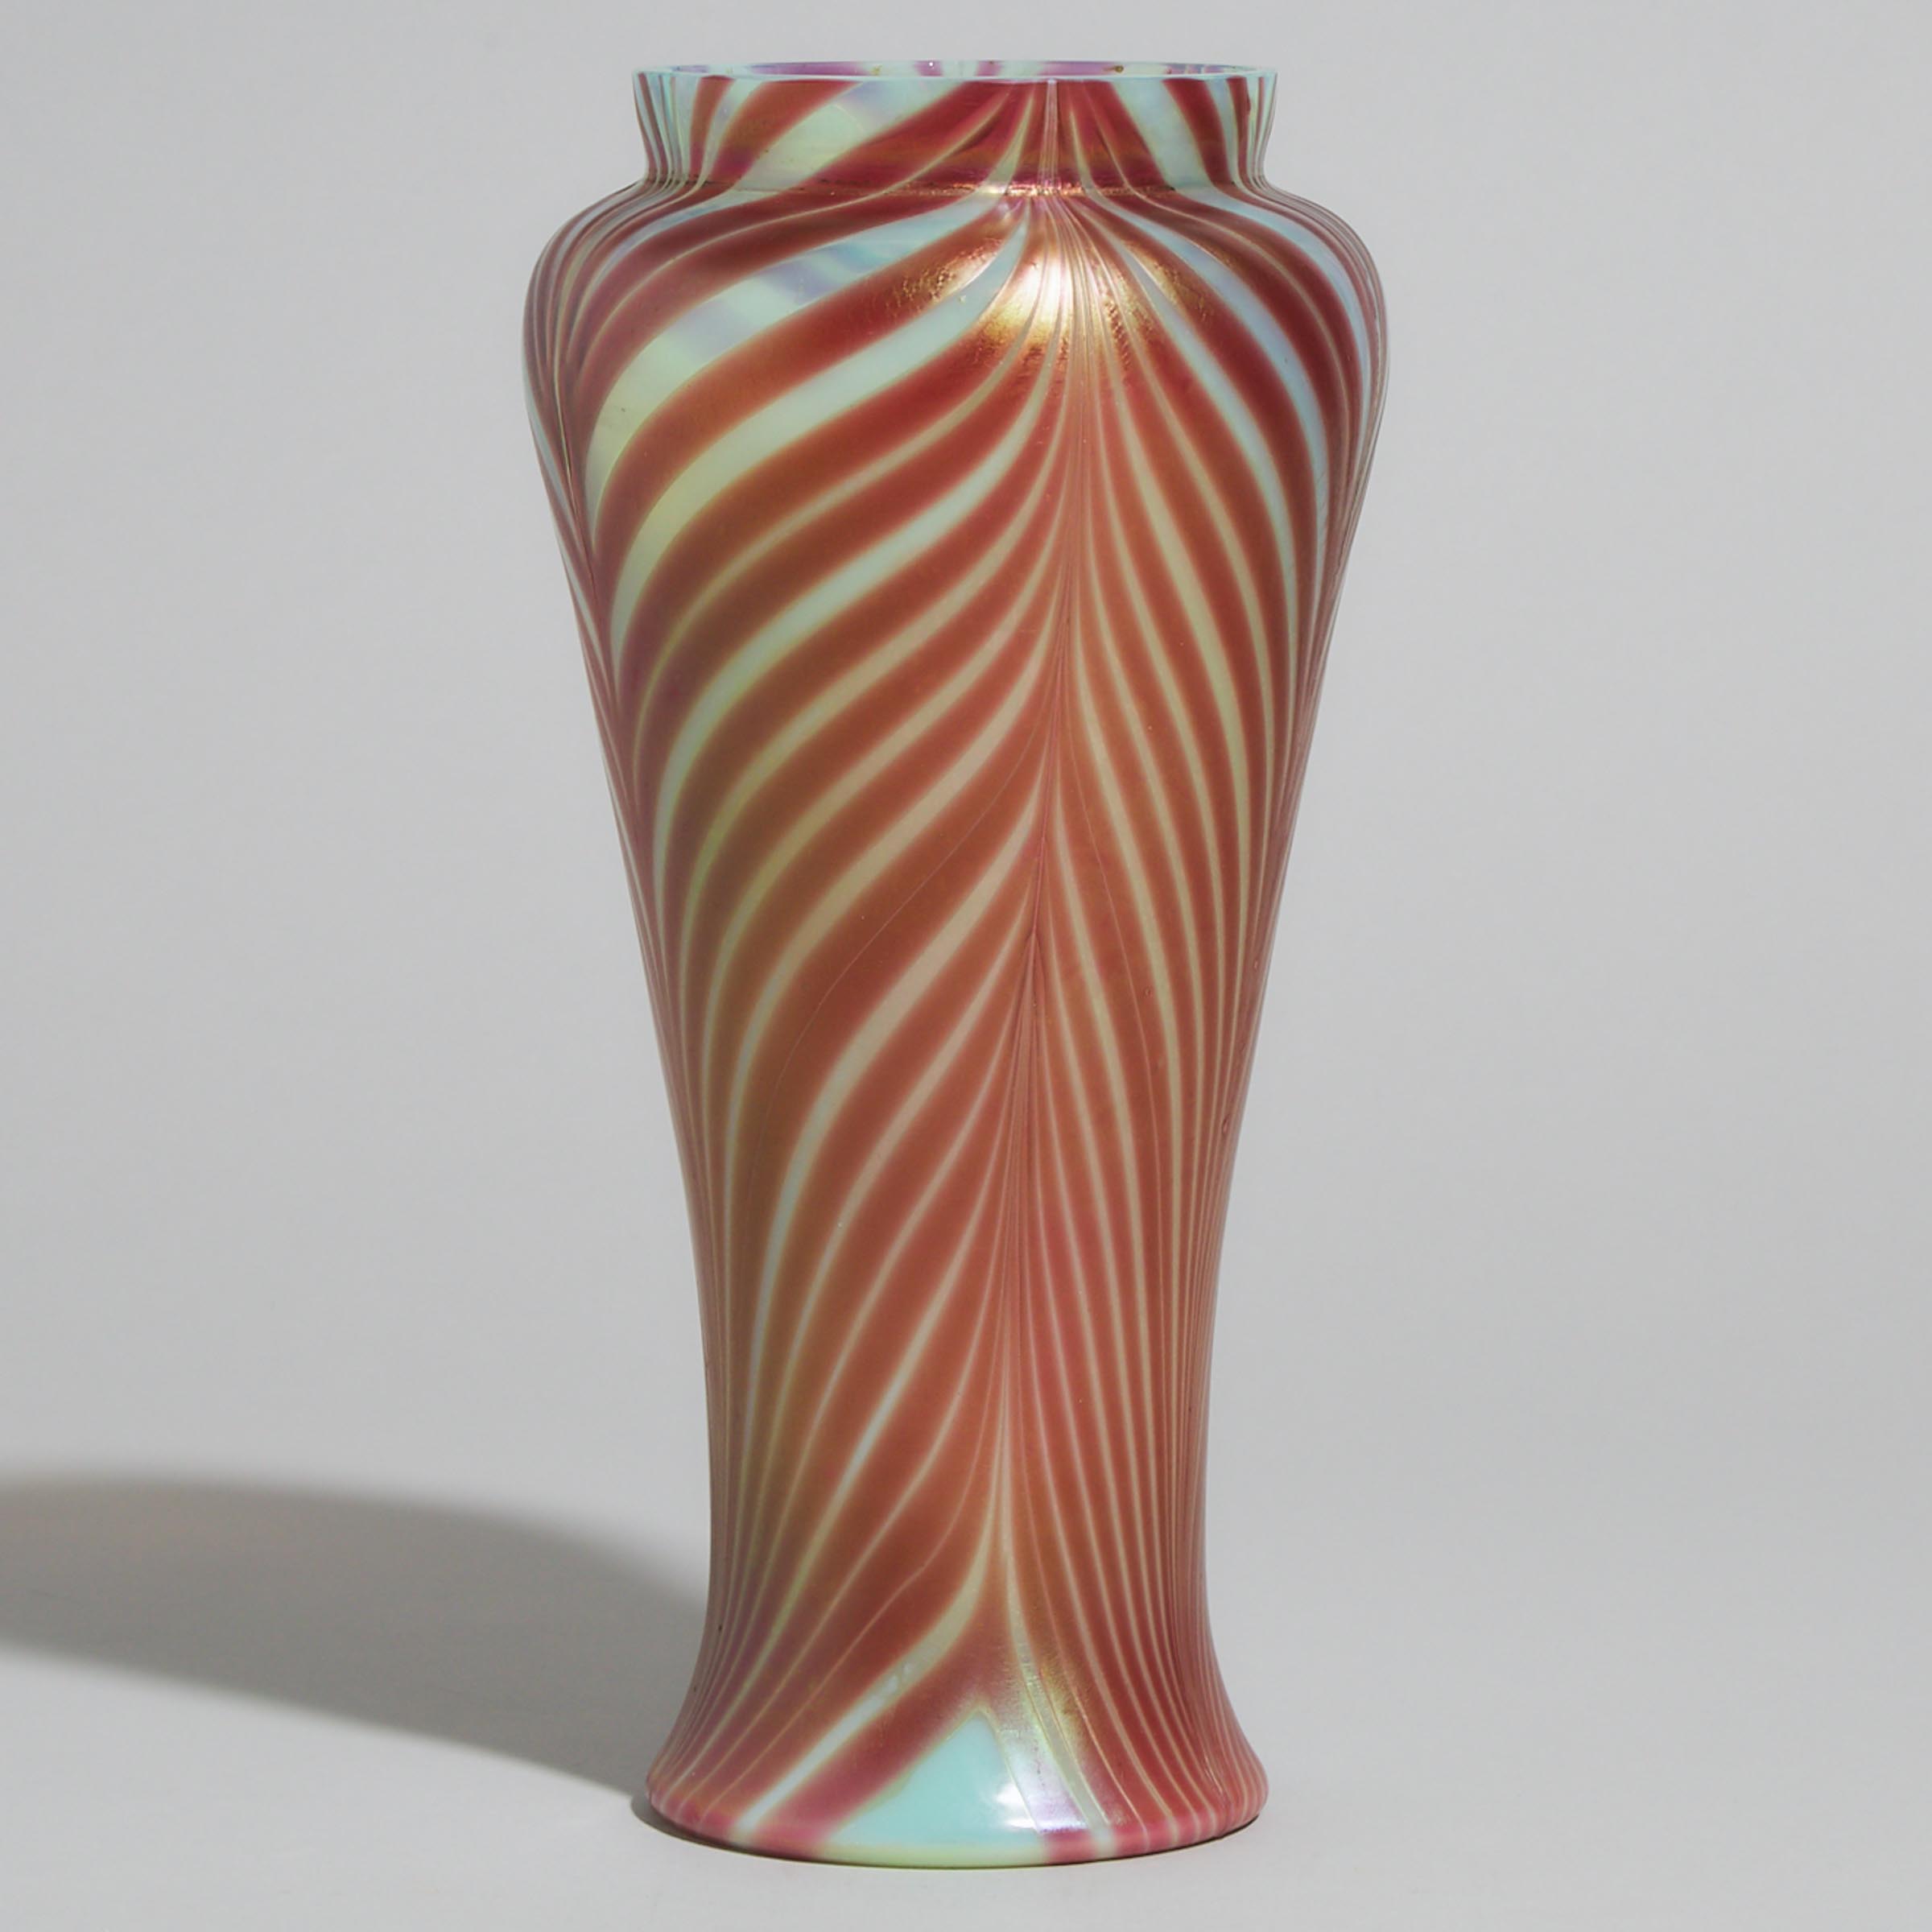 Austrian Pulled Feather Iridescent Glass Vase, early 20th century